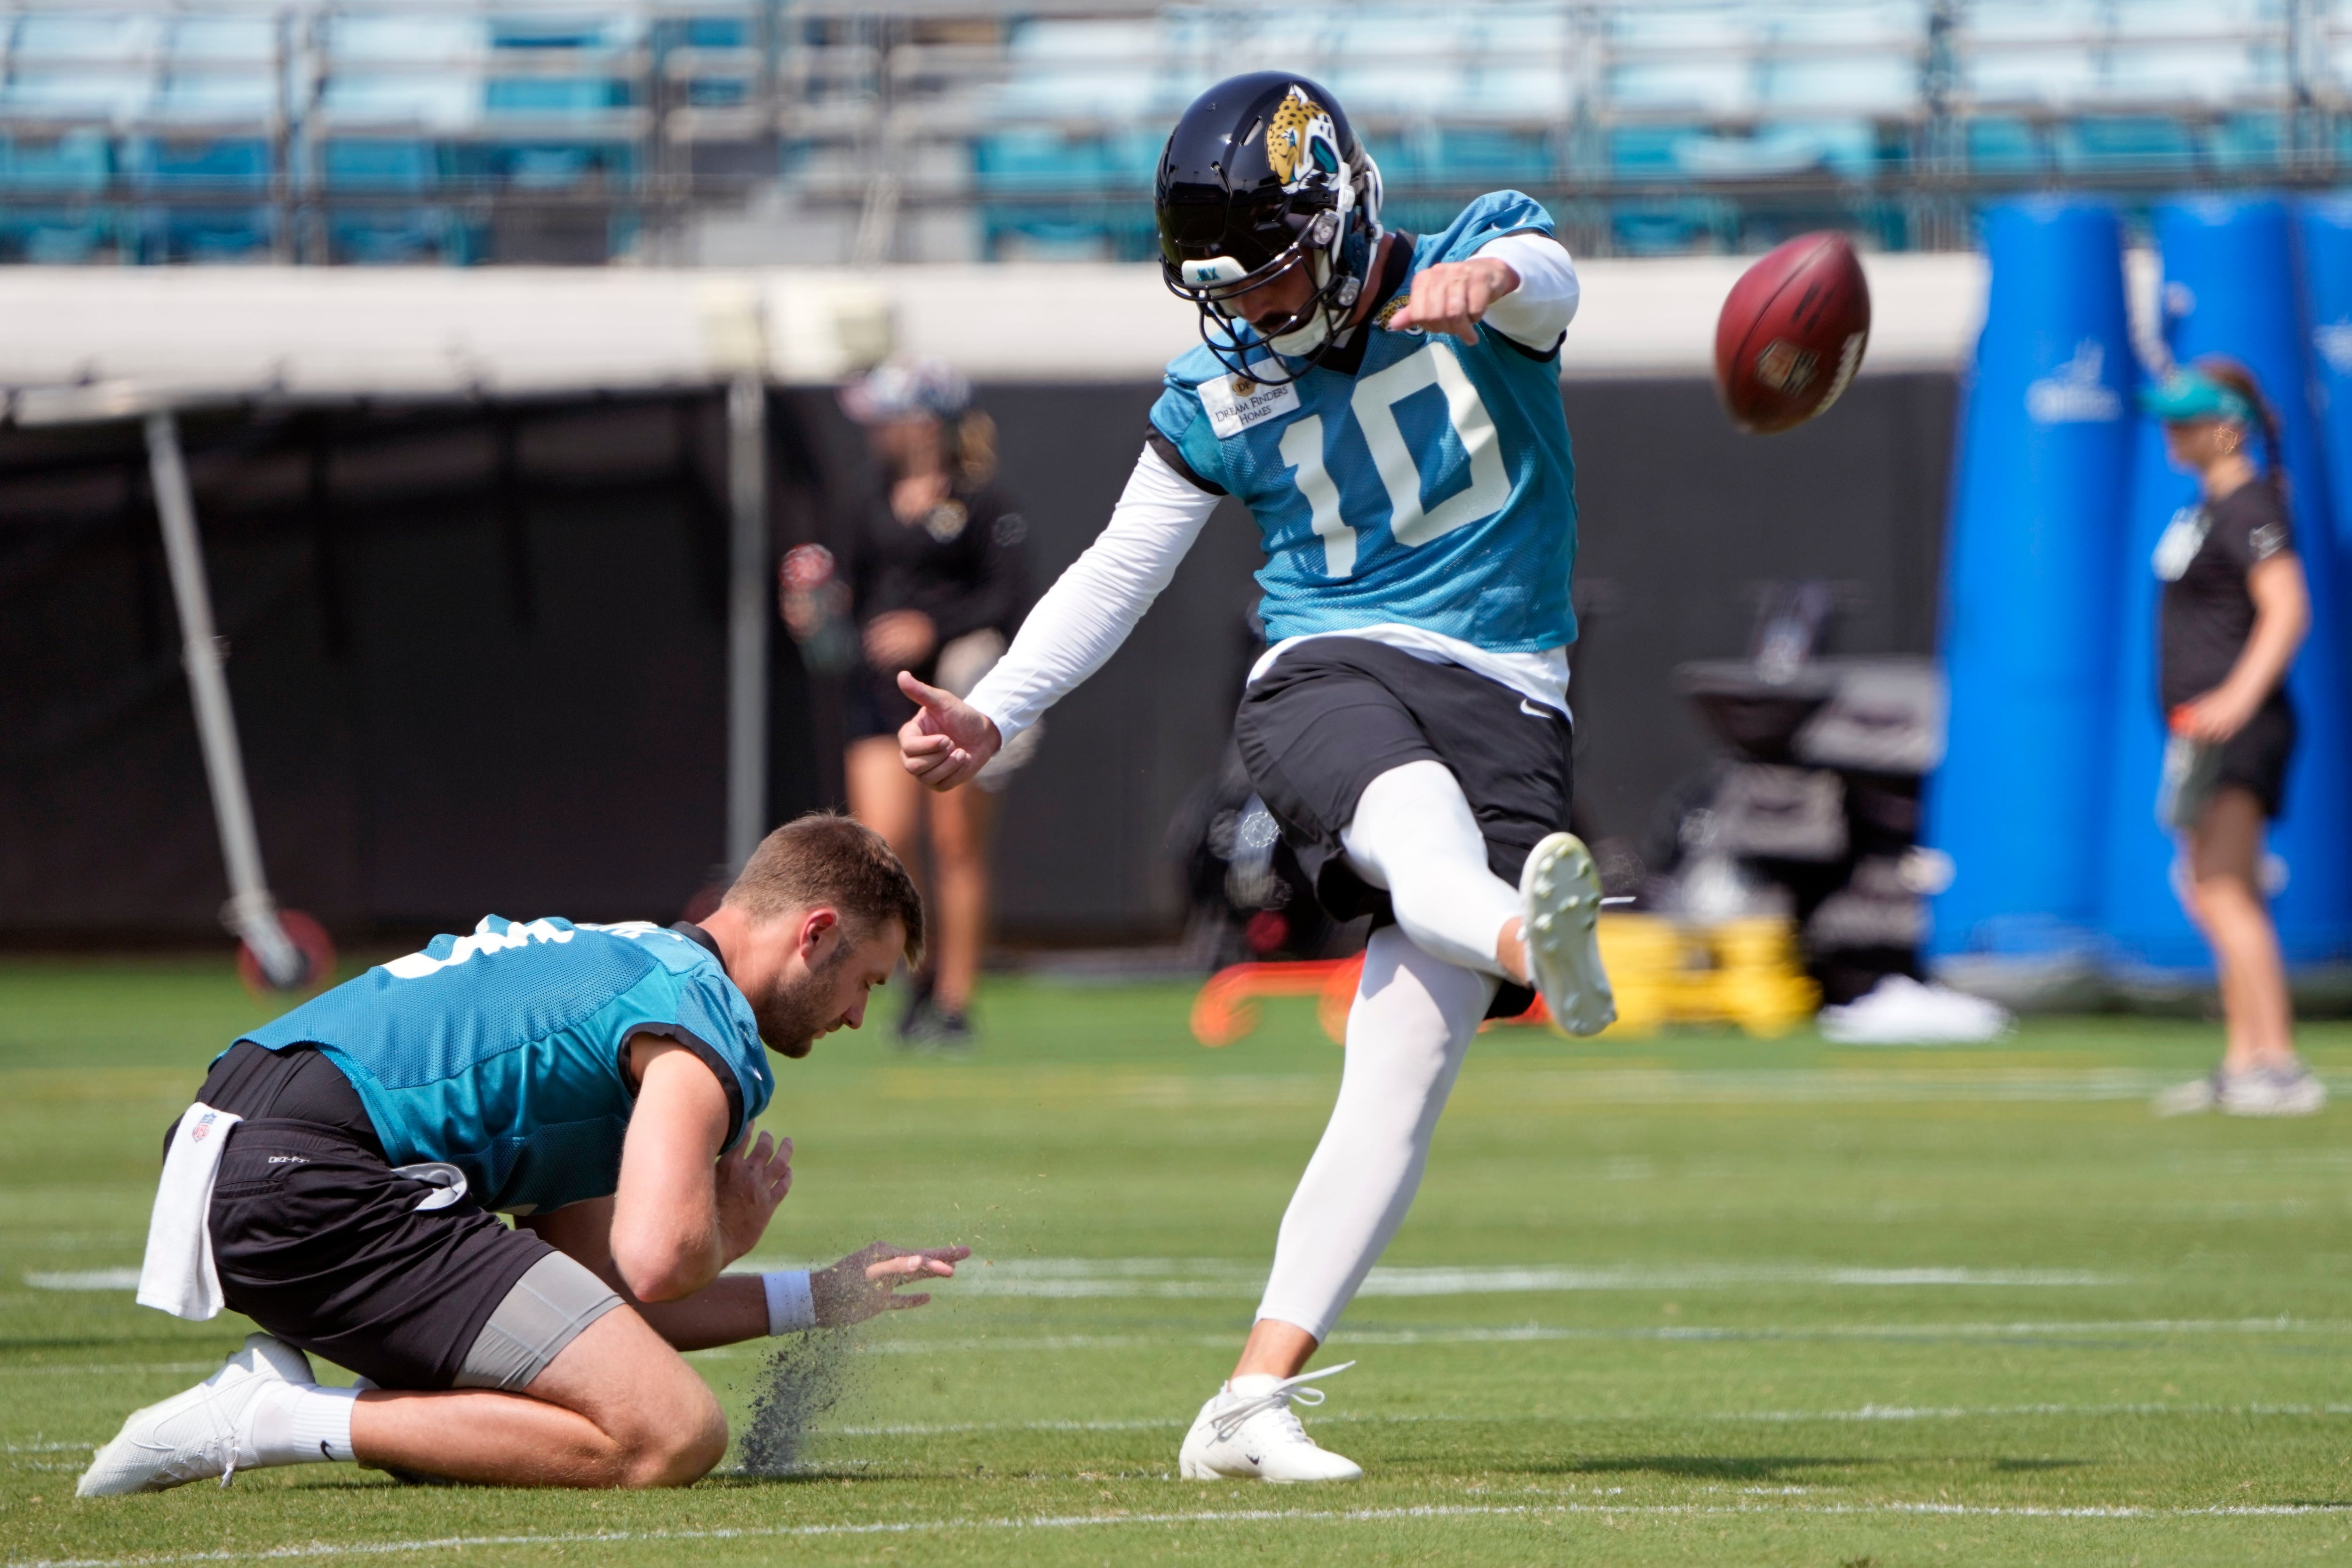 Jaguars offer fans free tickets to watch open practice Internewscast